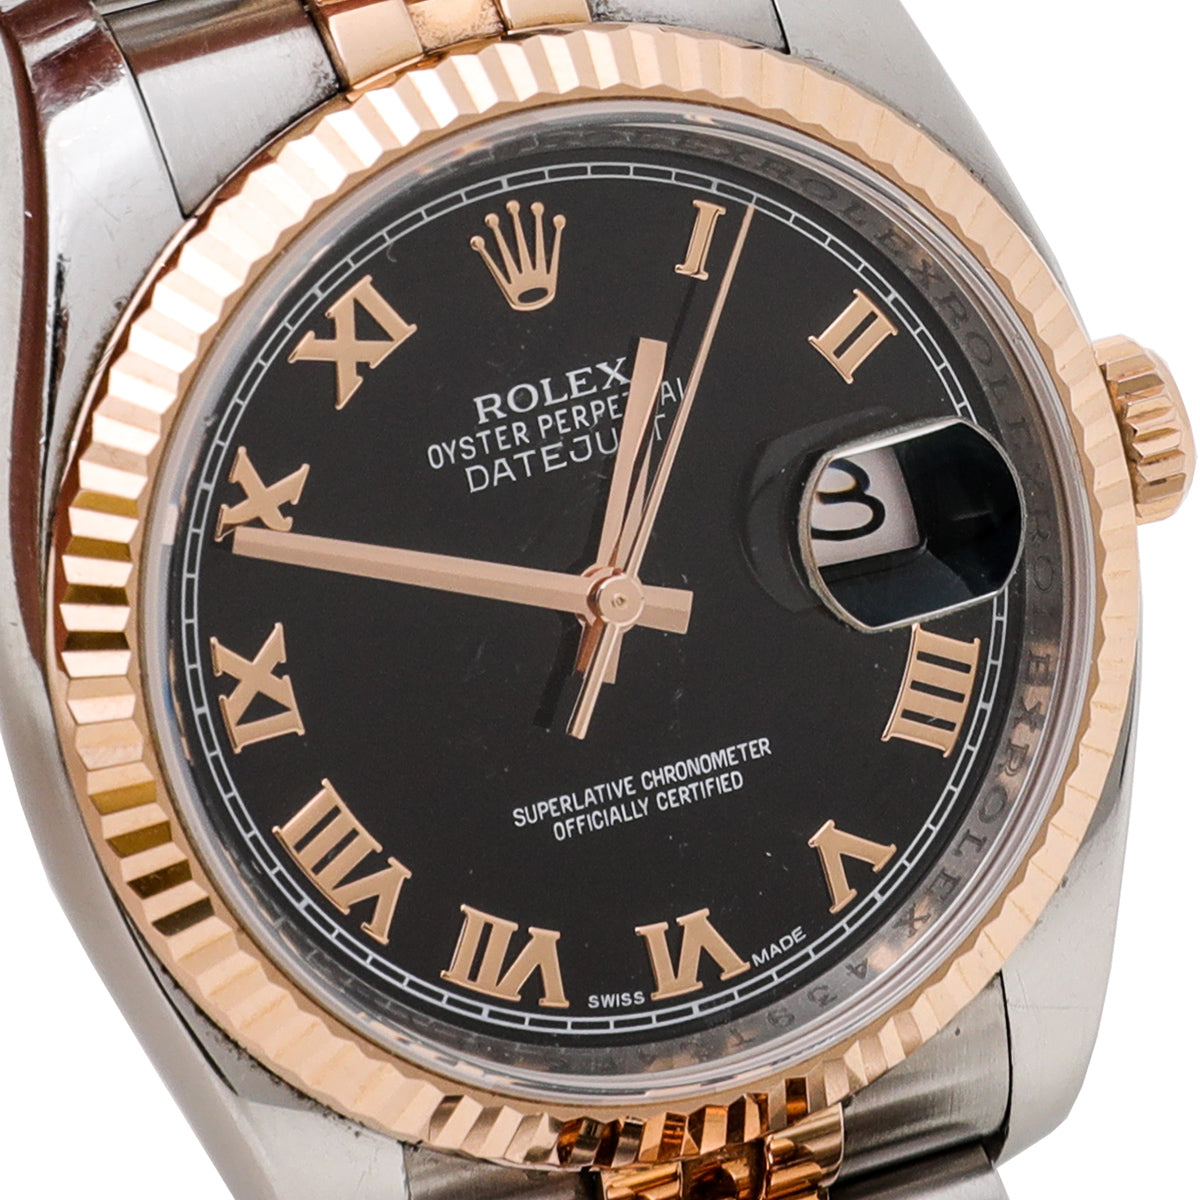 Rolex Datejust 18K Rose Gold Oyster Perpetual 36mm Watch